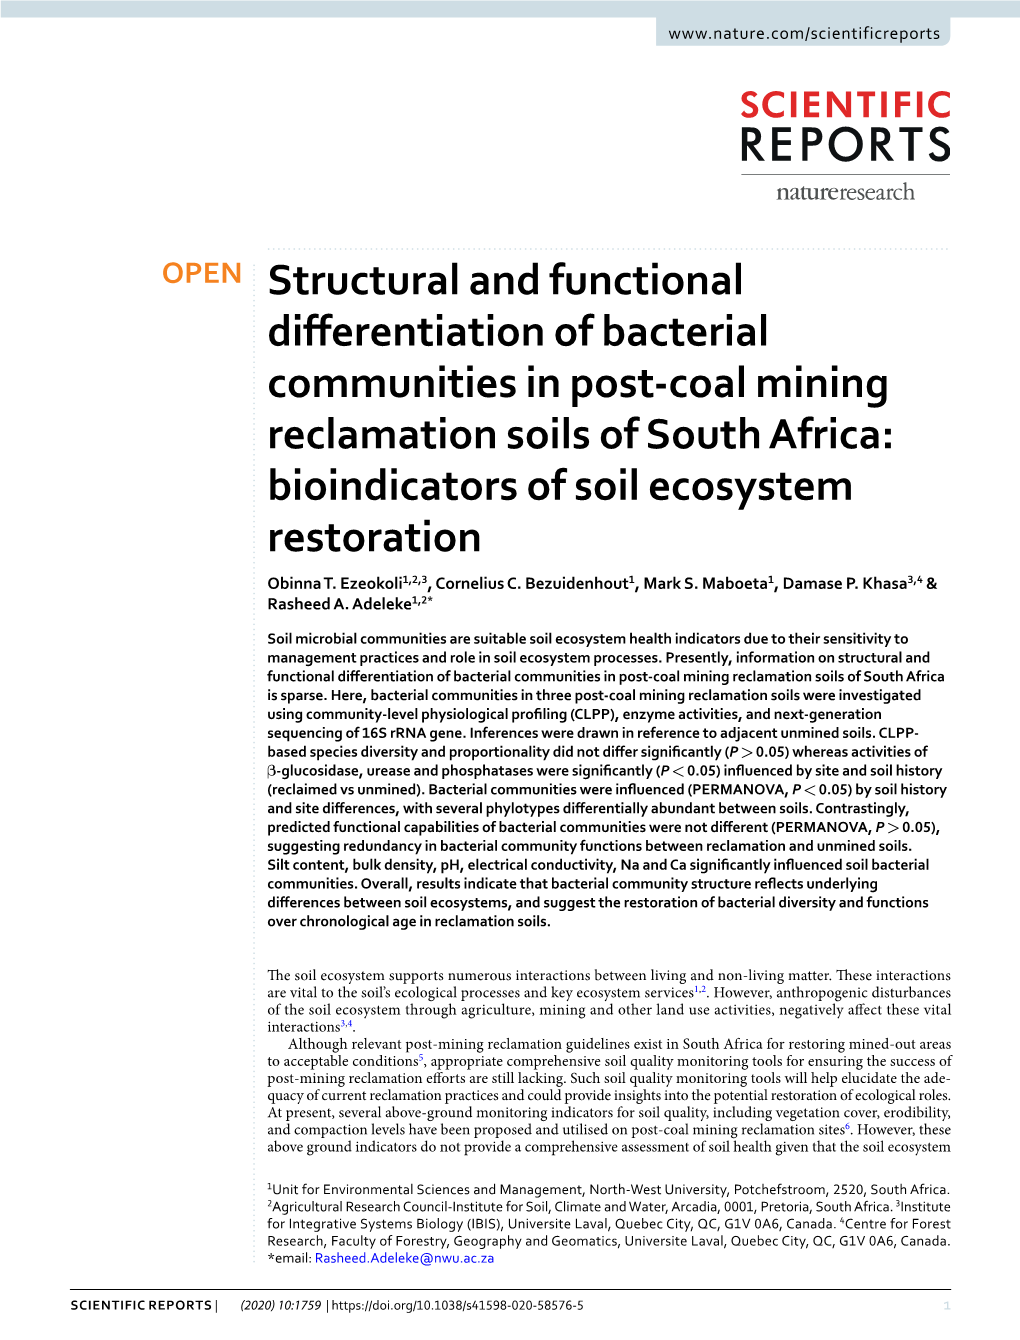 Structural and Functional Differentiation of Bacterial Communities